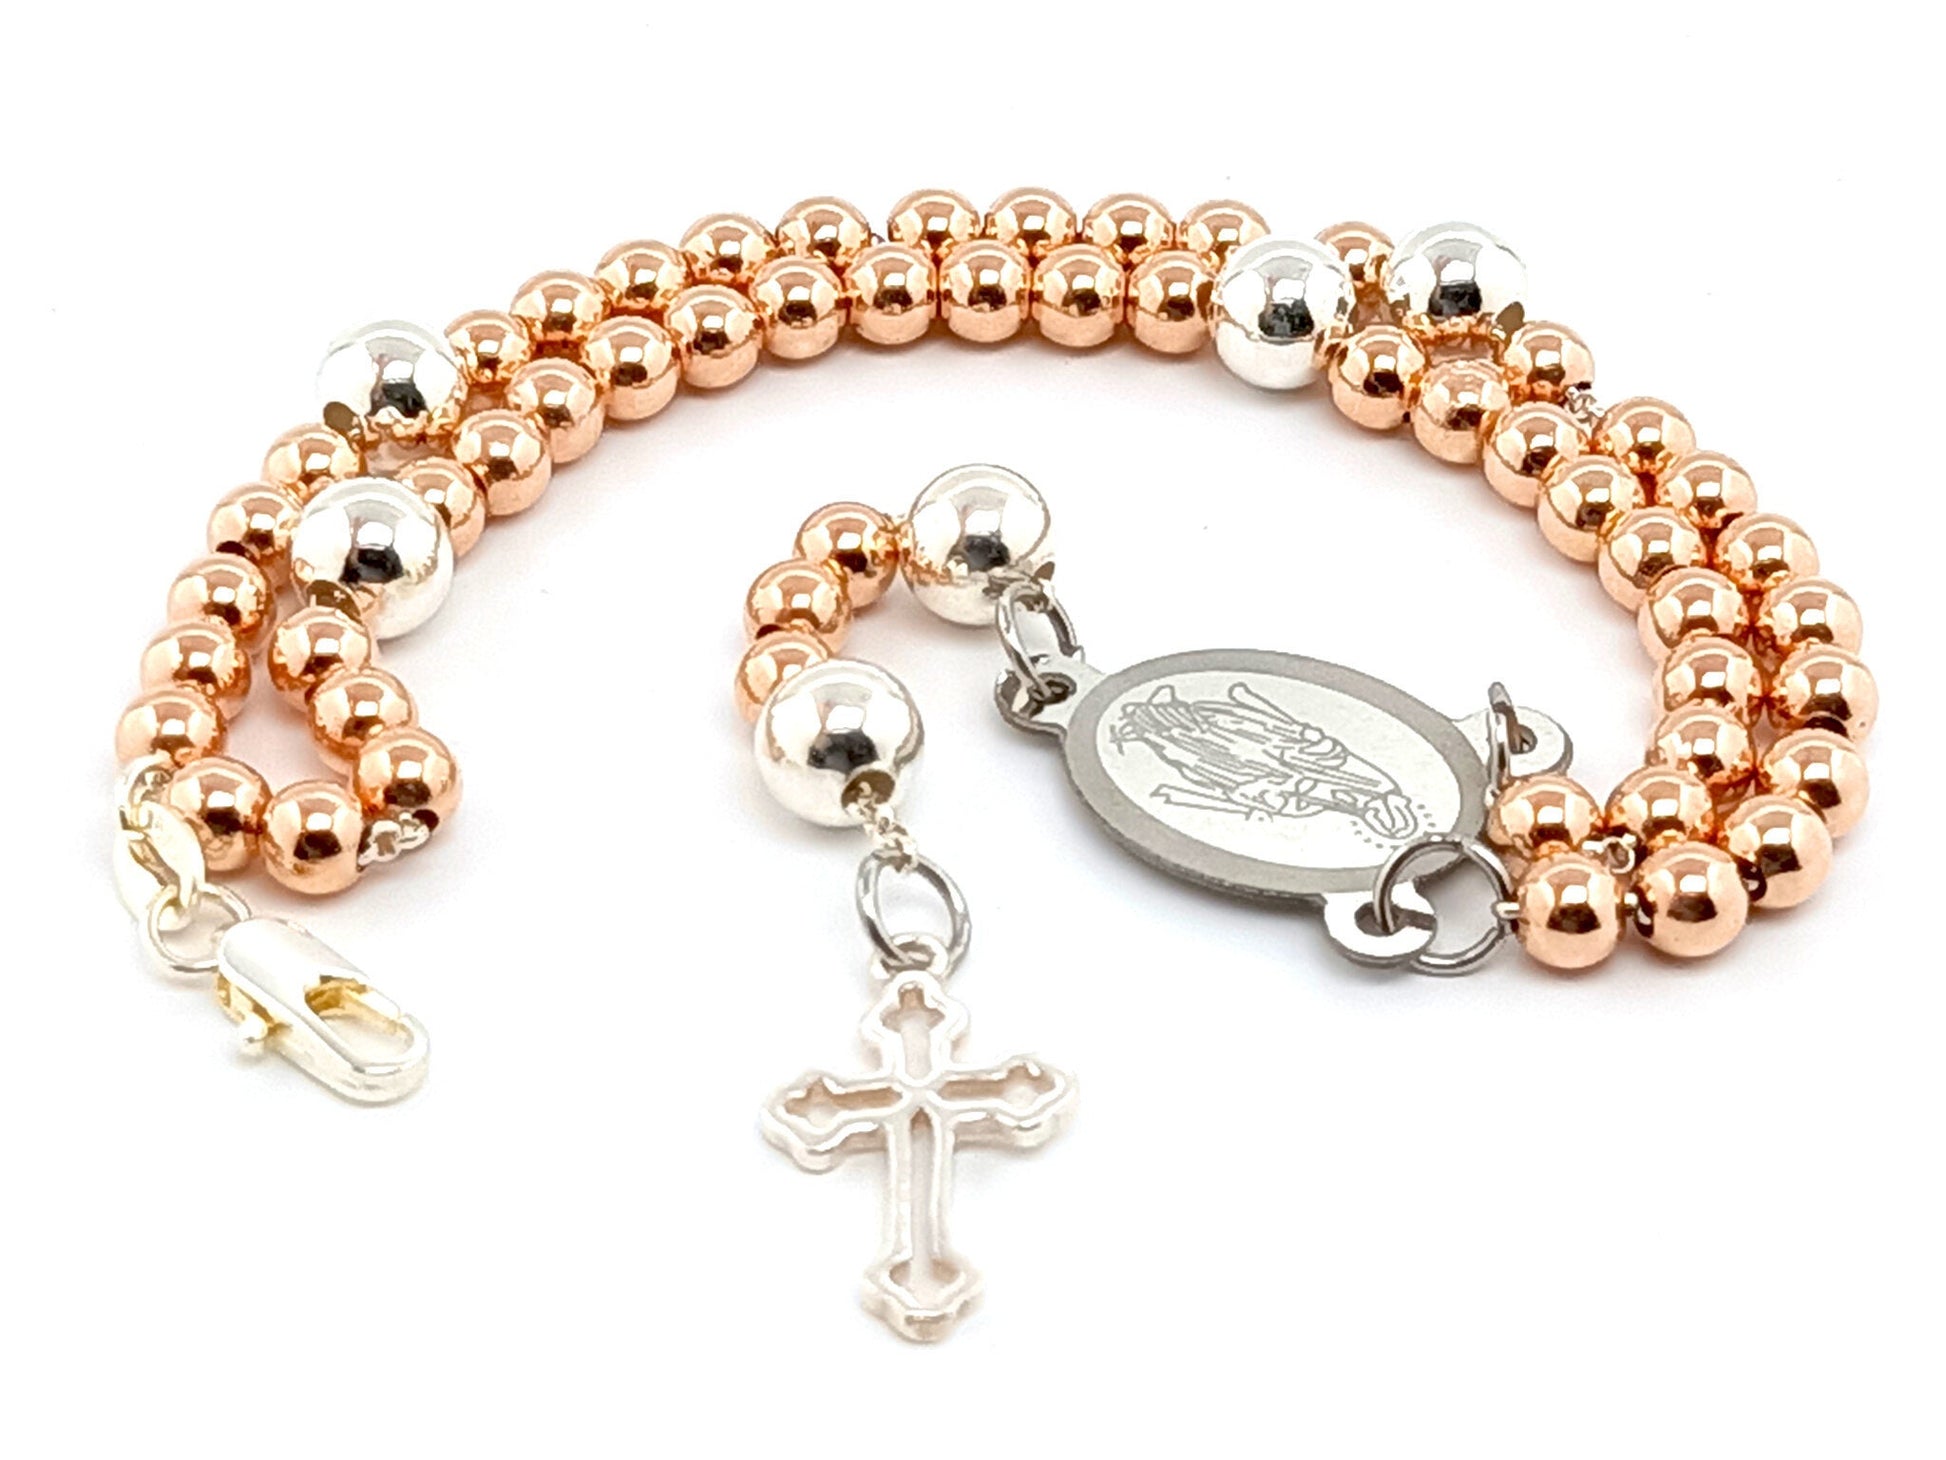 Sterling silver rose gold unique rosary beads rosary bracelet with Miraculous medal centre and 925 sterling silver linking cross.